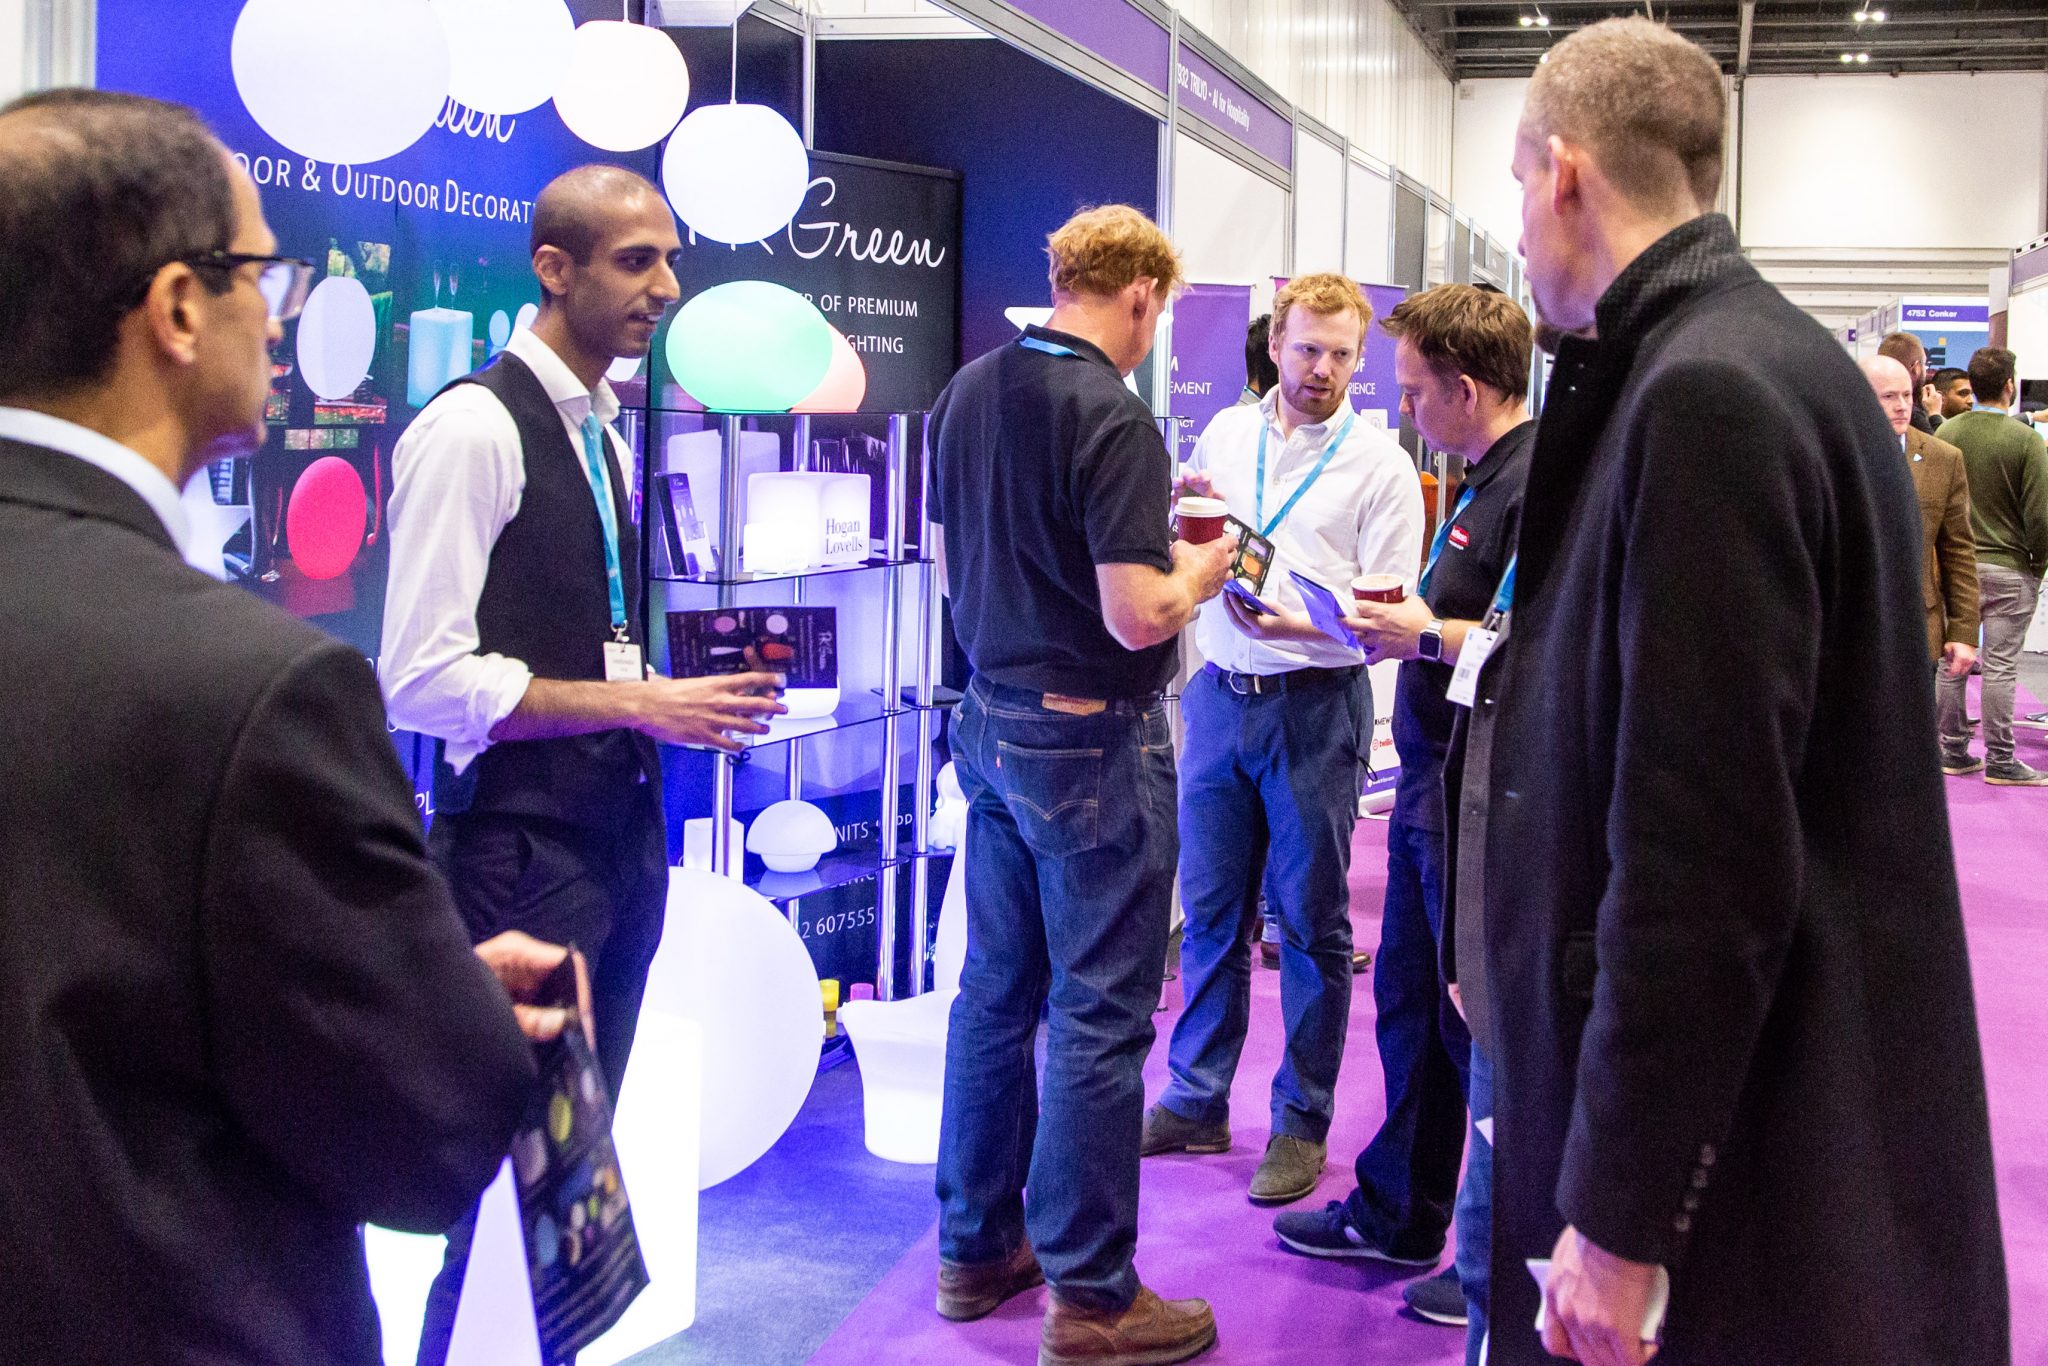 The Smart Home Expo is your chance to witness the future of connected and independent living @SmartHomeExpo